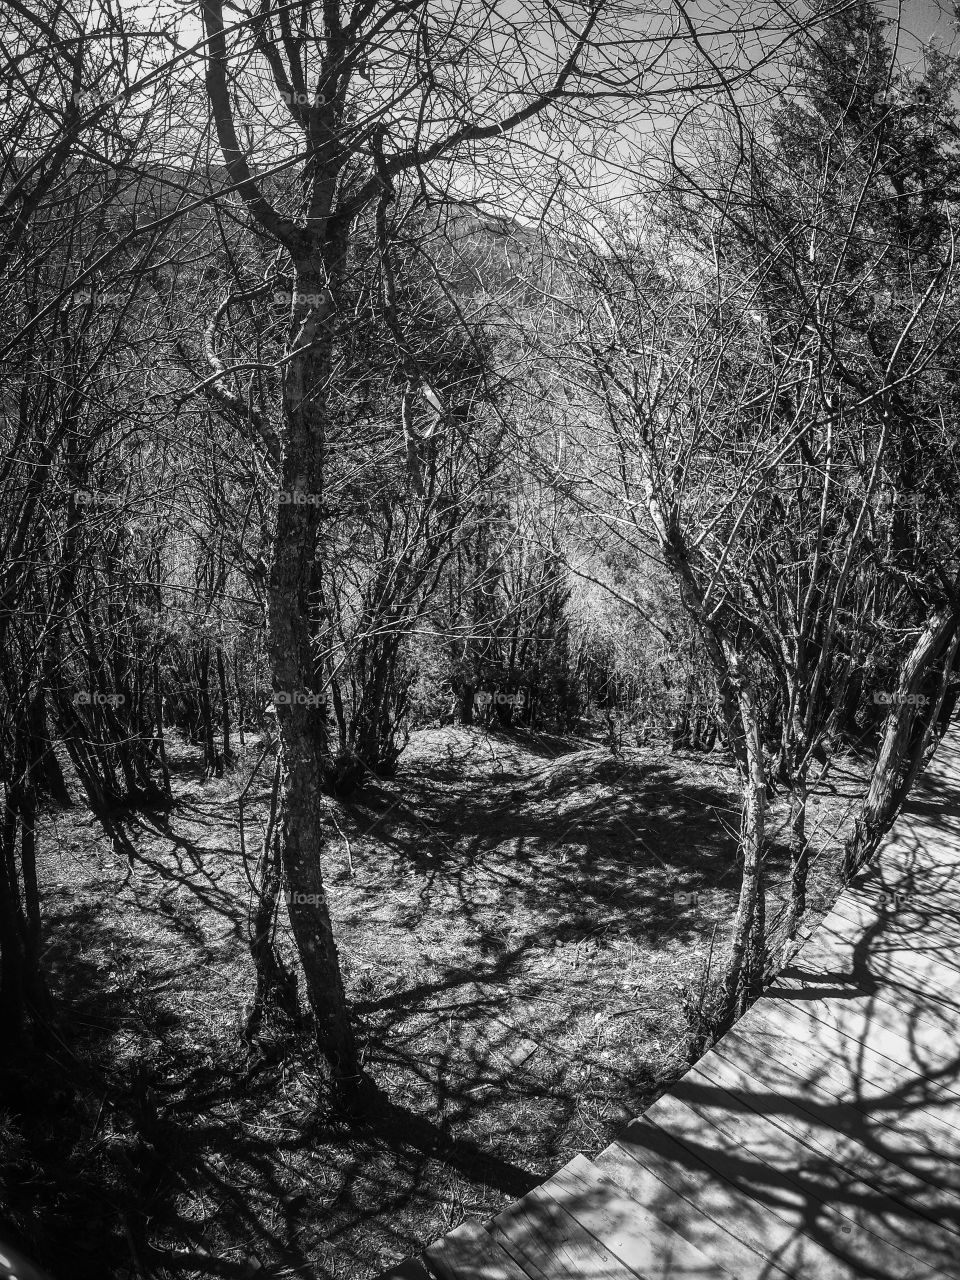 Black and white image of trees in the park, tree shadows, dry season